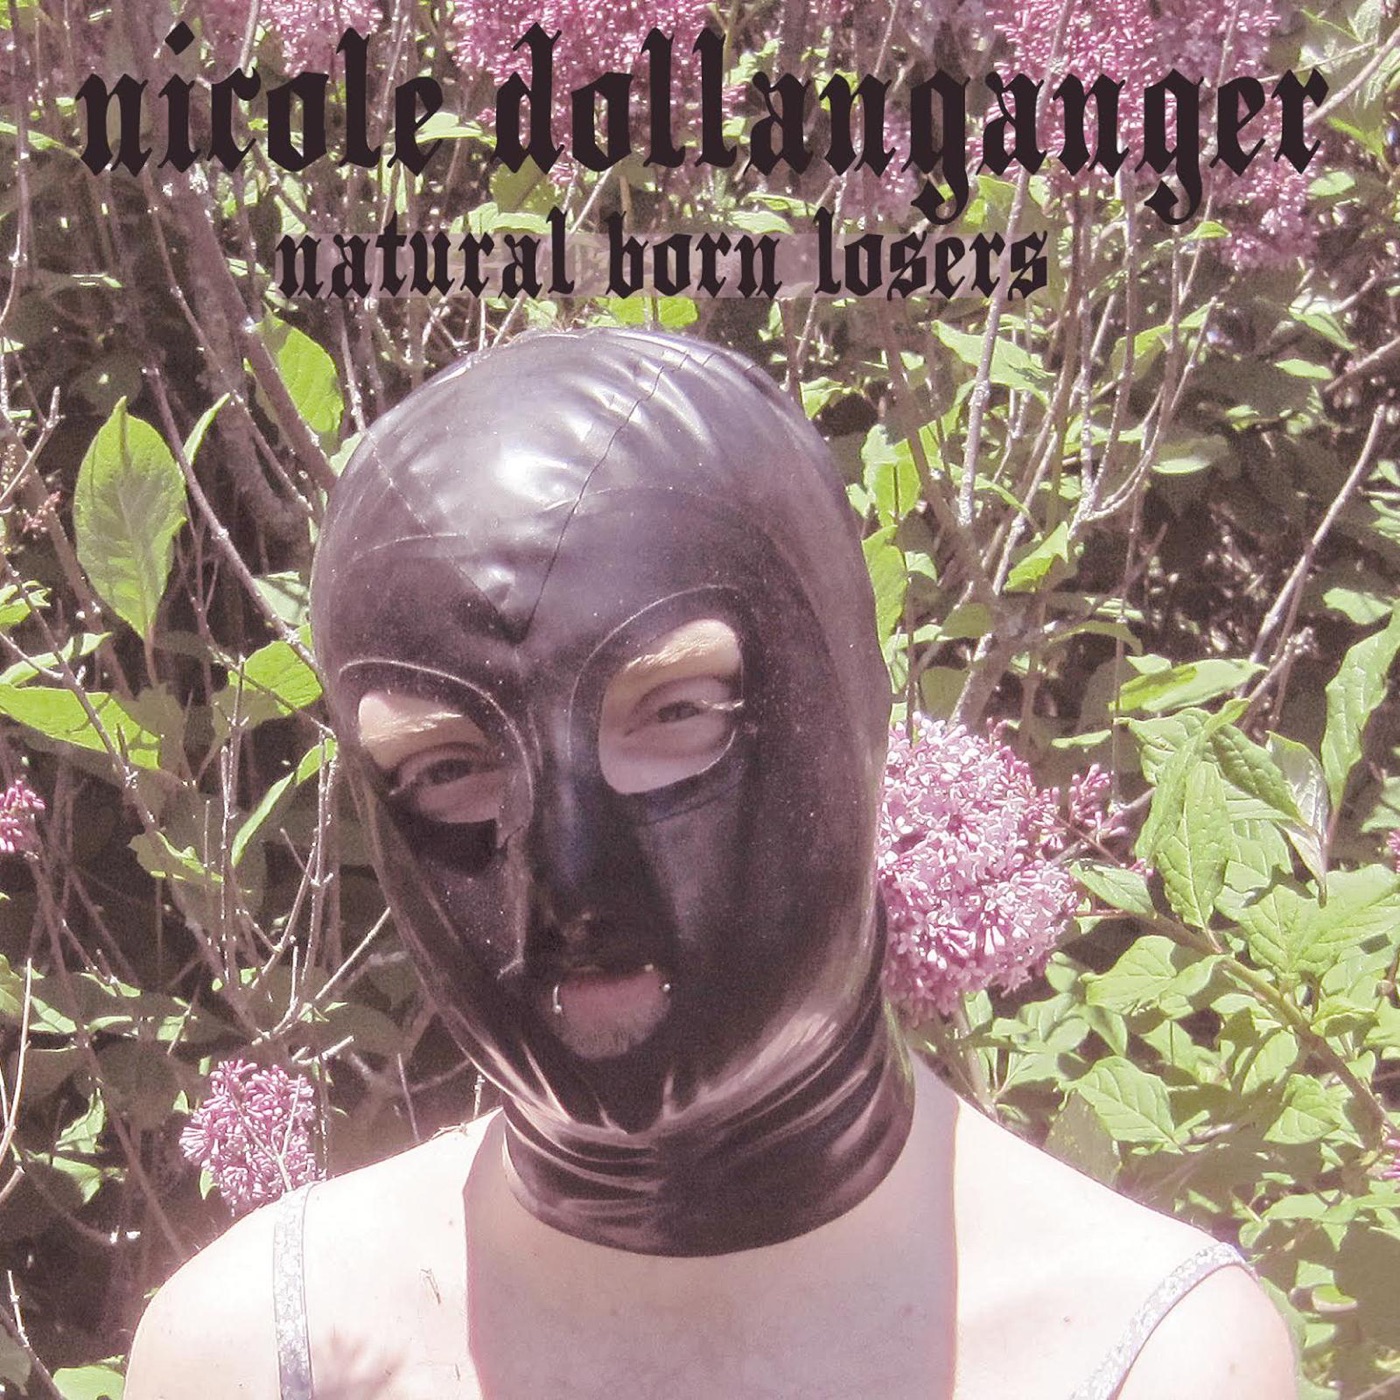 Natural Born Losers by Nicole Dollanganger